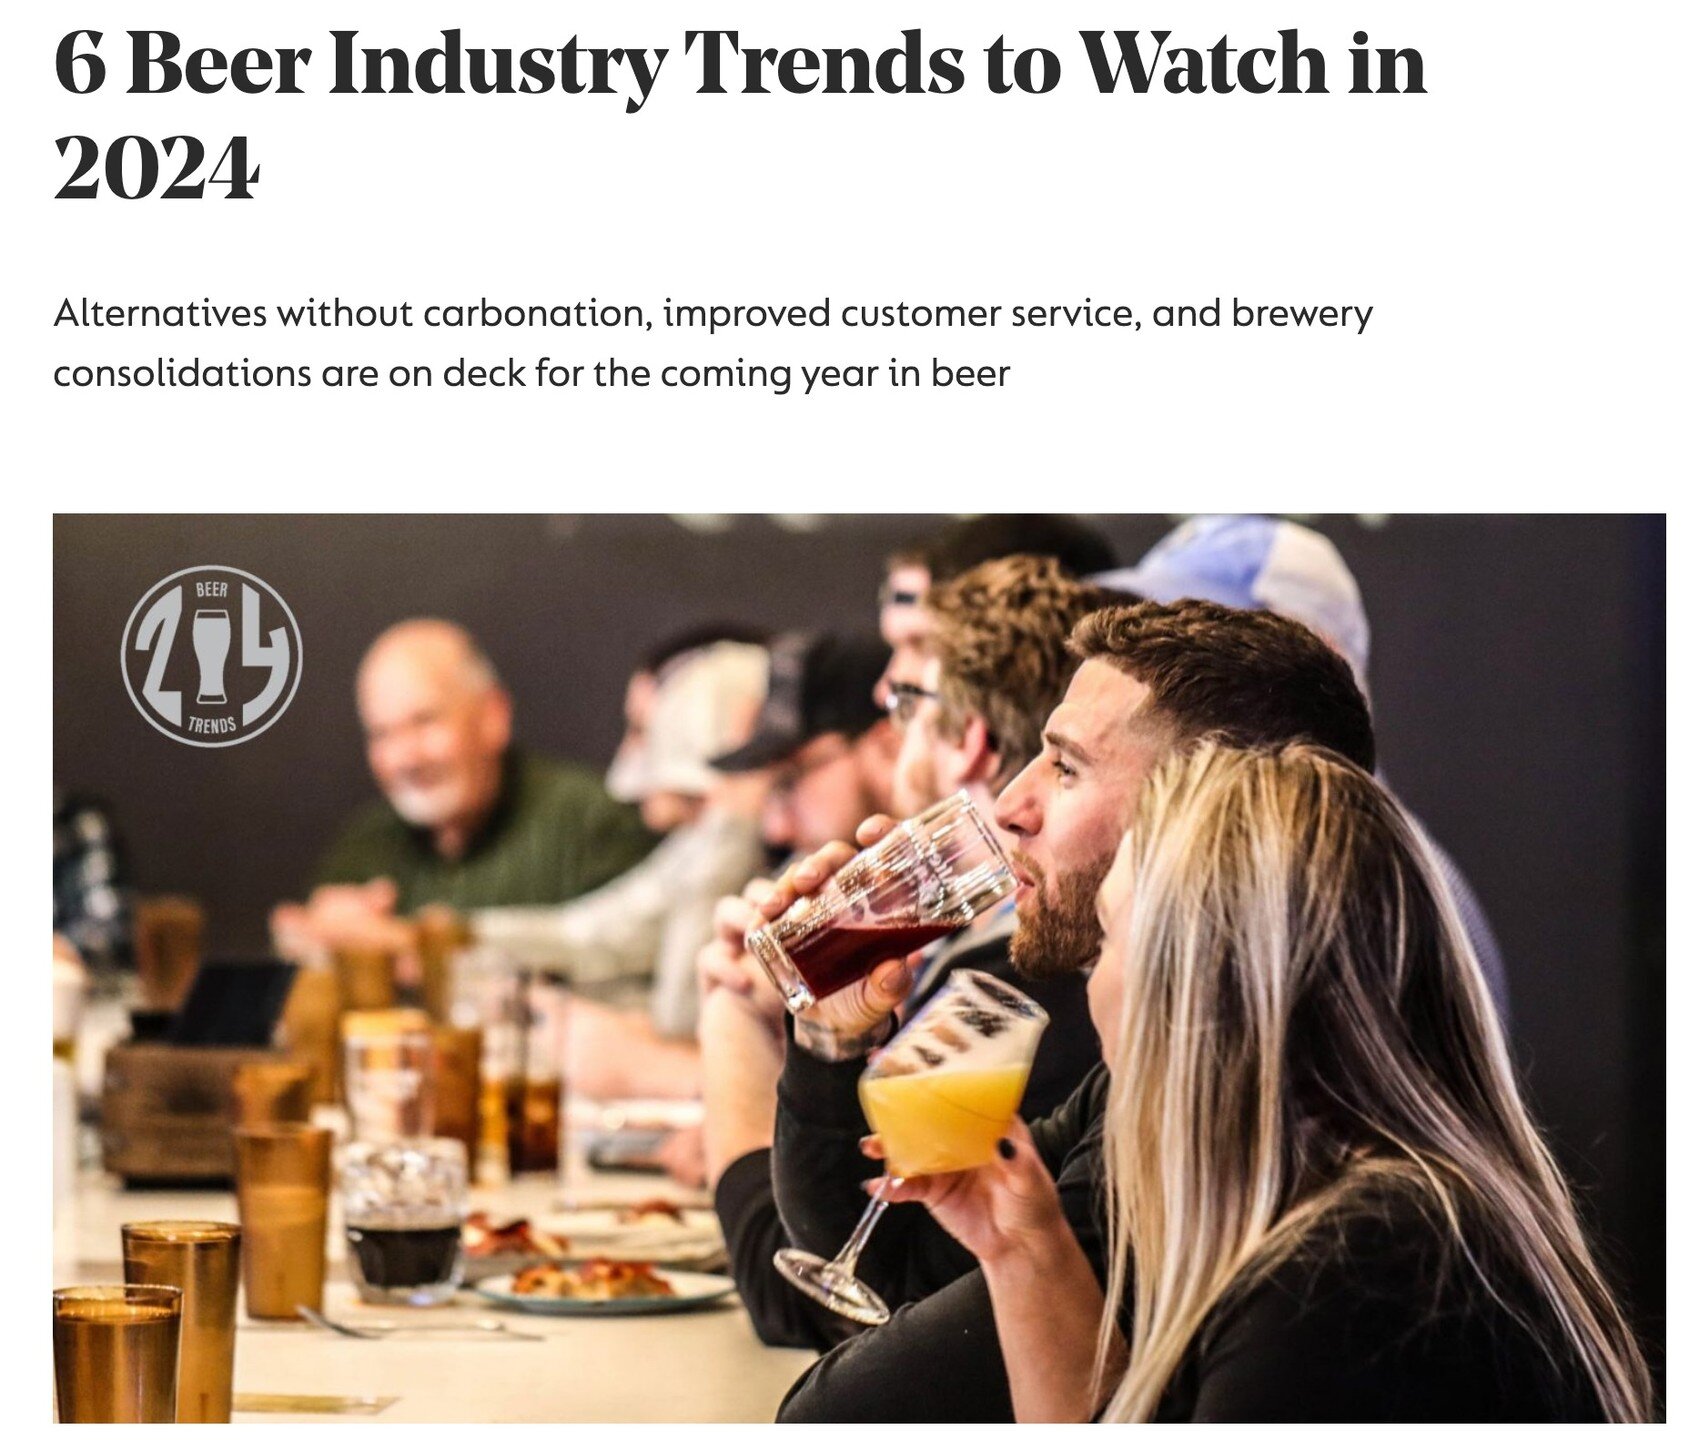 Each year for @sevenfiftydaily, I reach out to dozens of beer-industry professionals to create a road map for the year ahead. Craft beer is no longer novel, but &ldquo;this doesn&rsquo;t mean the industry is in decline or going away,&rdquo; says Trev